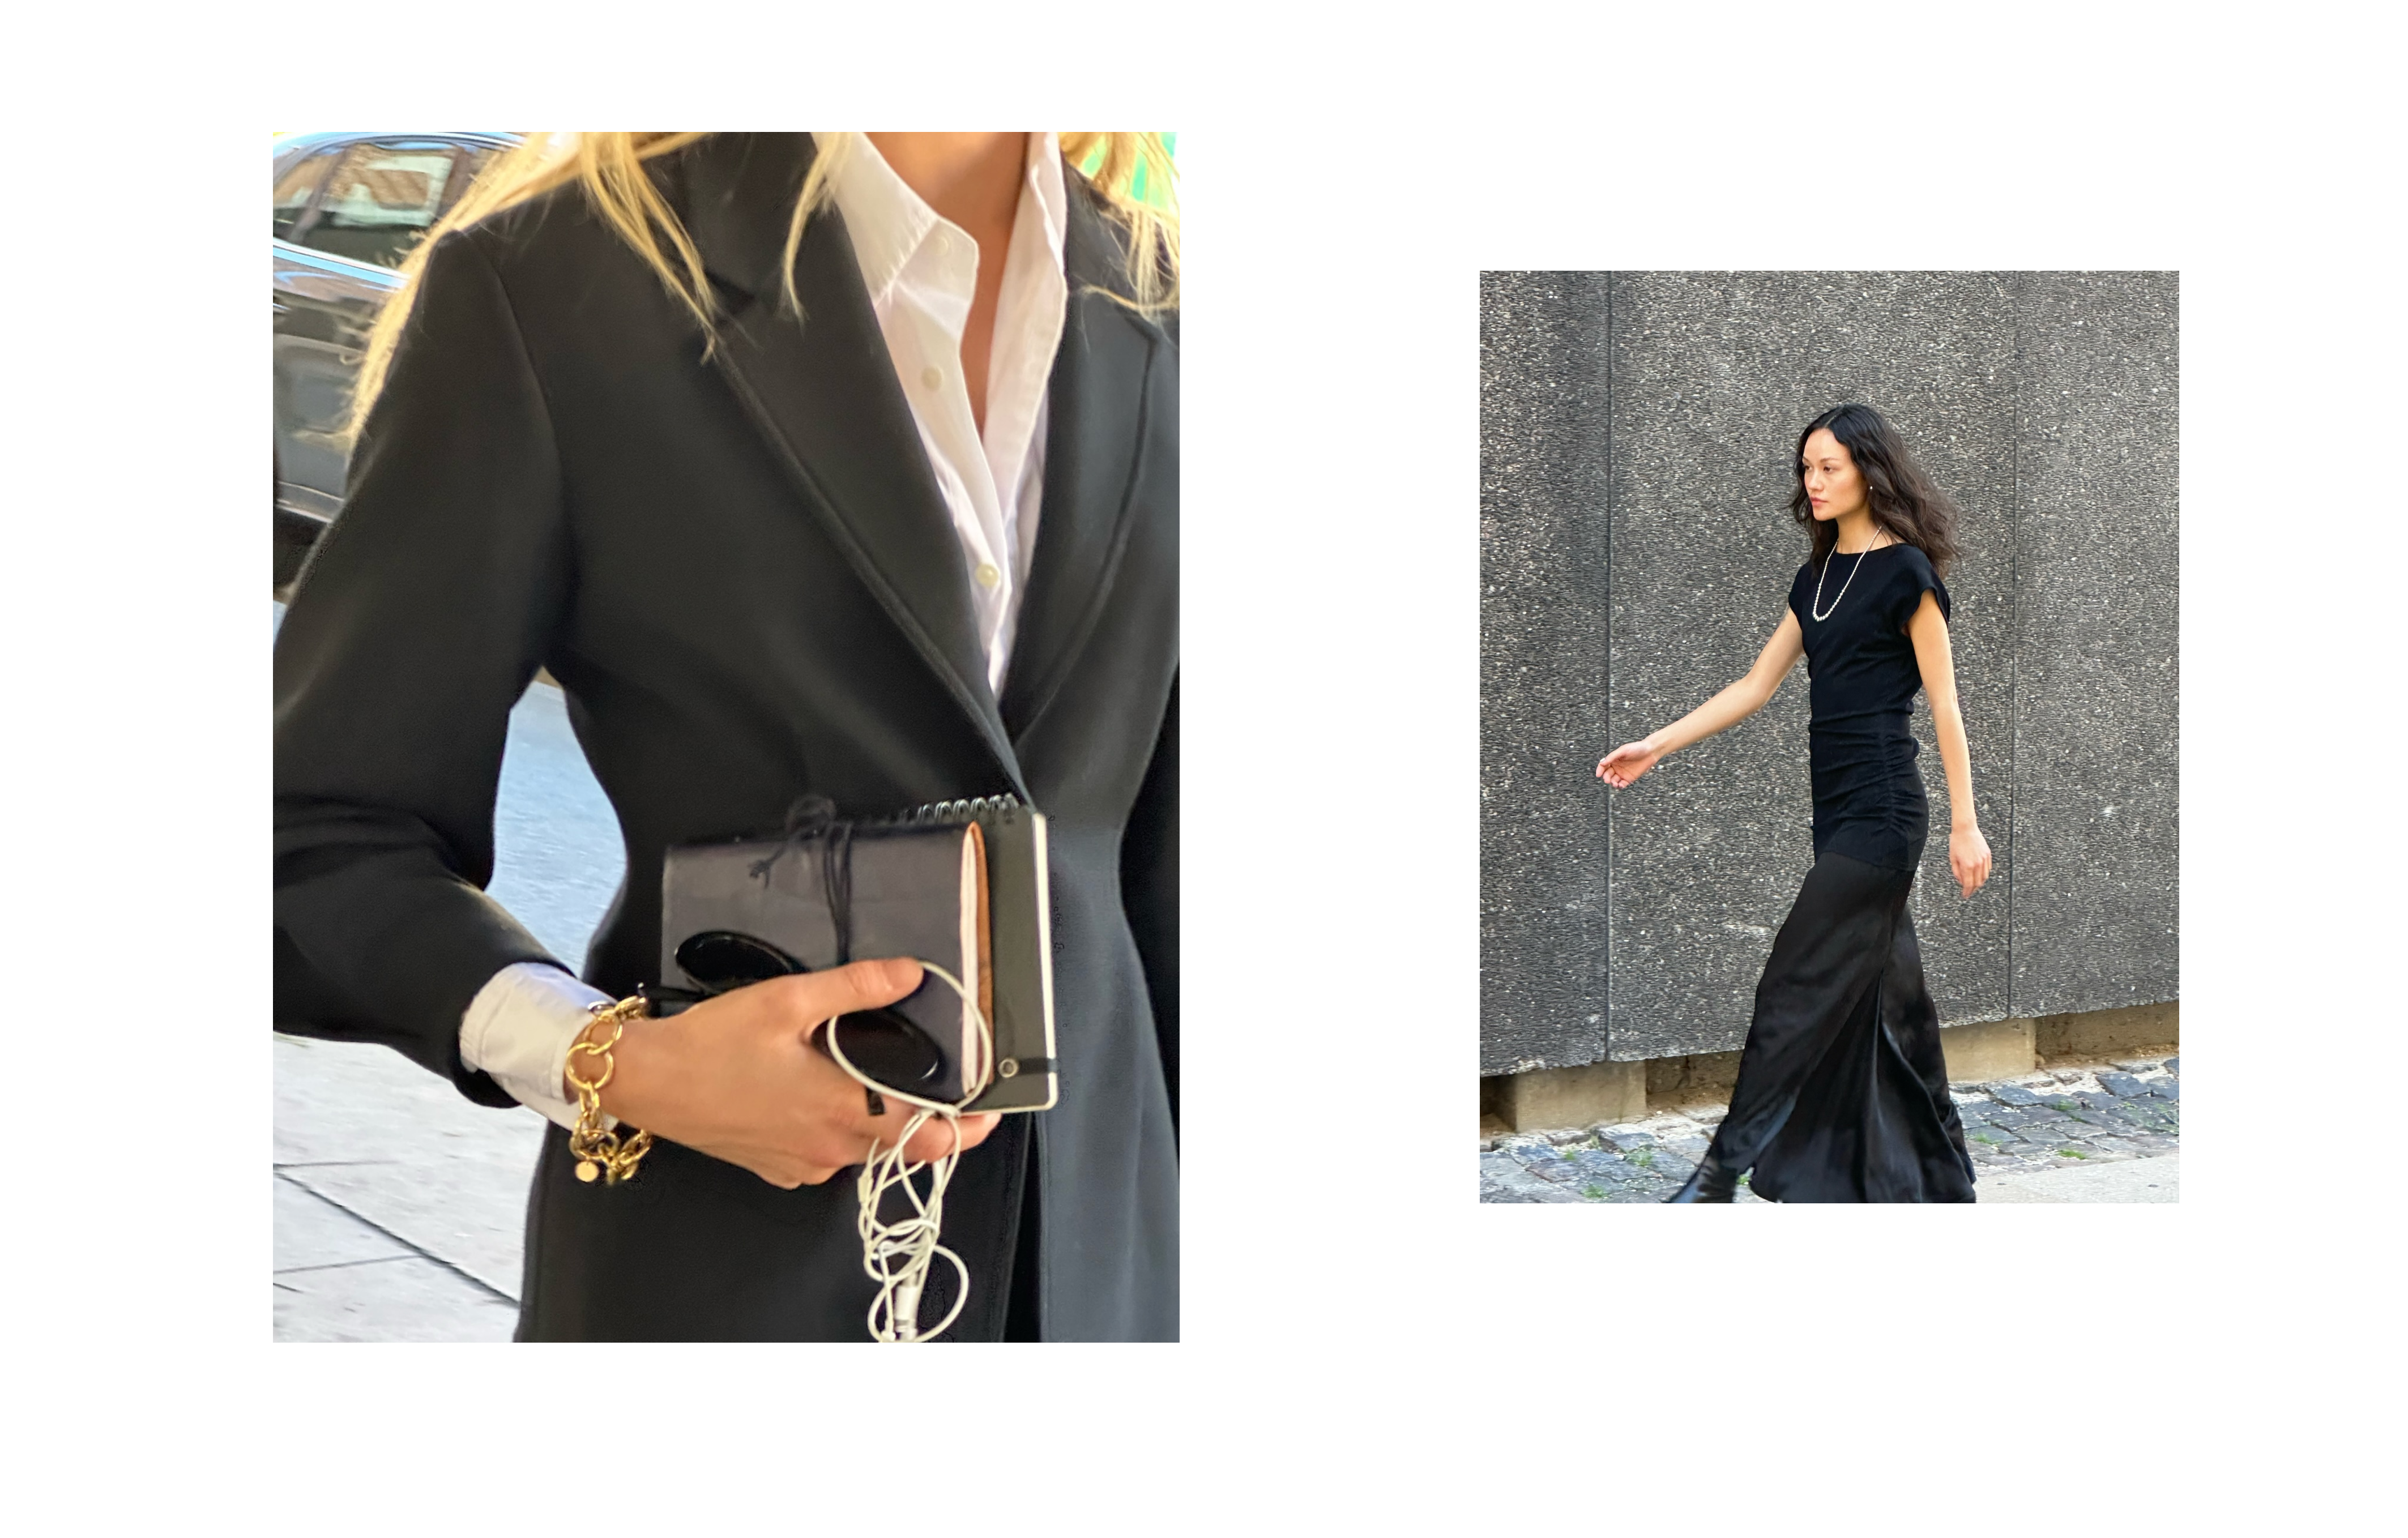 A black attire and beautiful silhouettes are perfect to pair with the core collection jewelry pieces